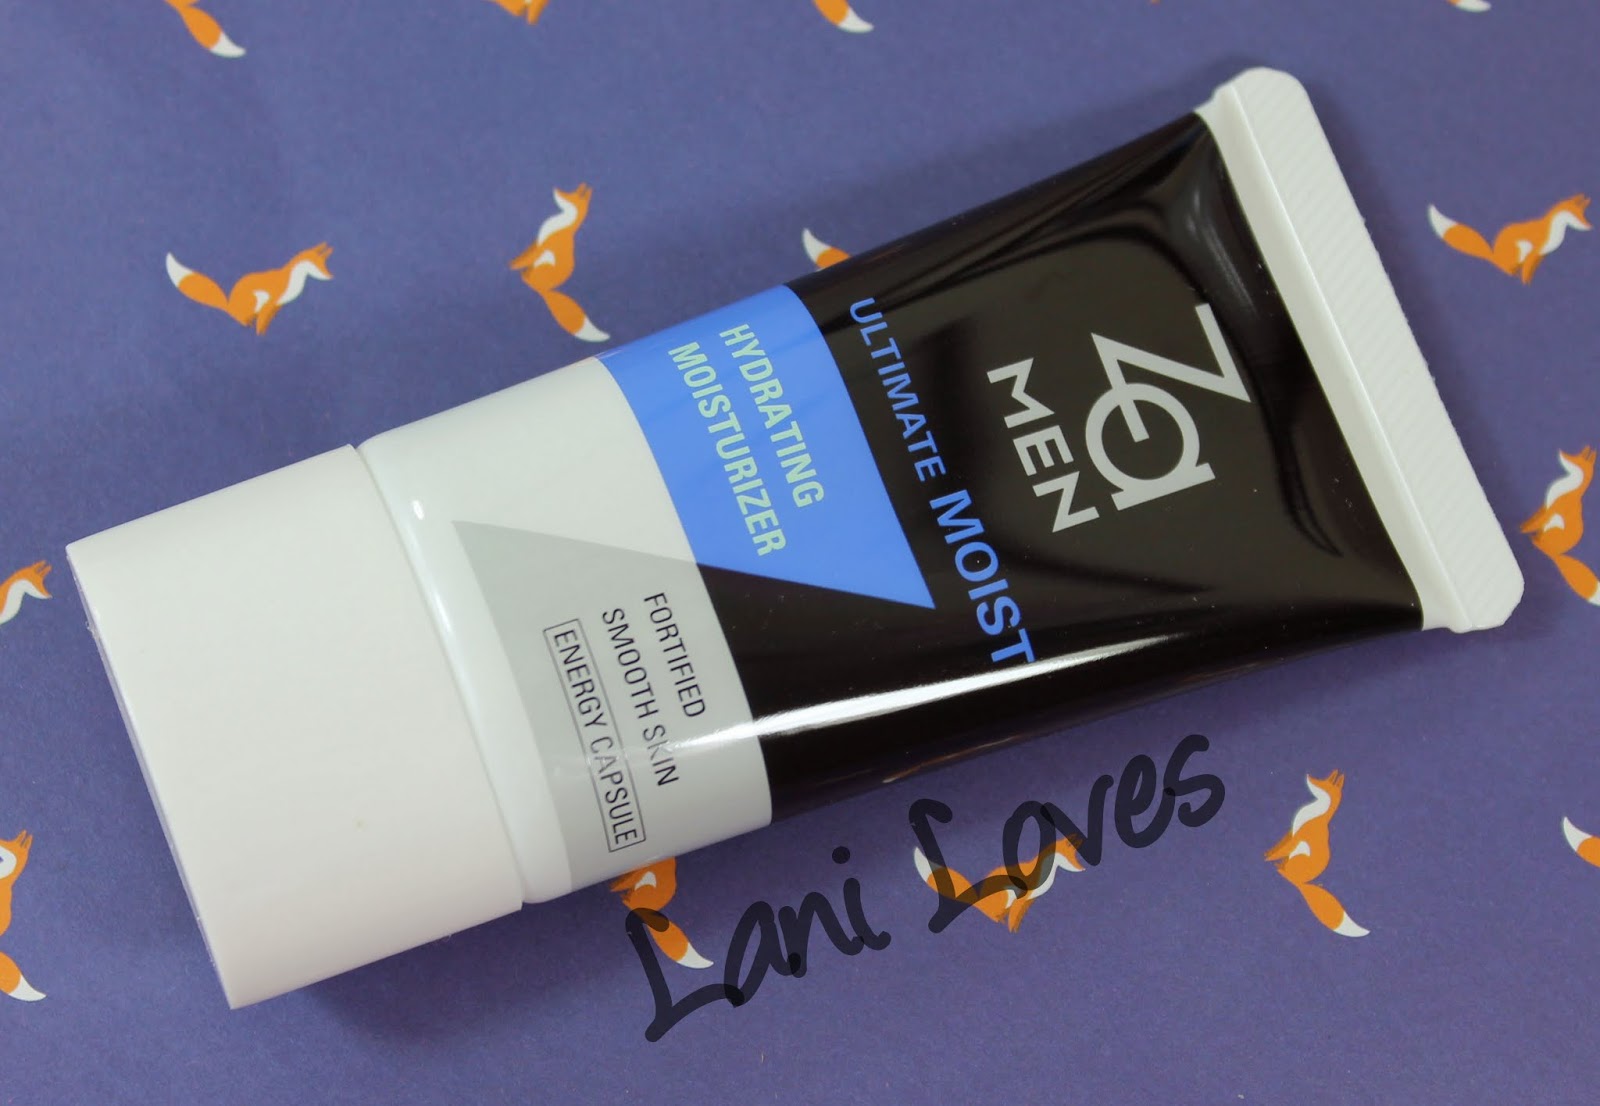 ZA Men Ultimate Moist Smoothing Cleanser and Hydrating Moisturizer review